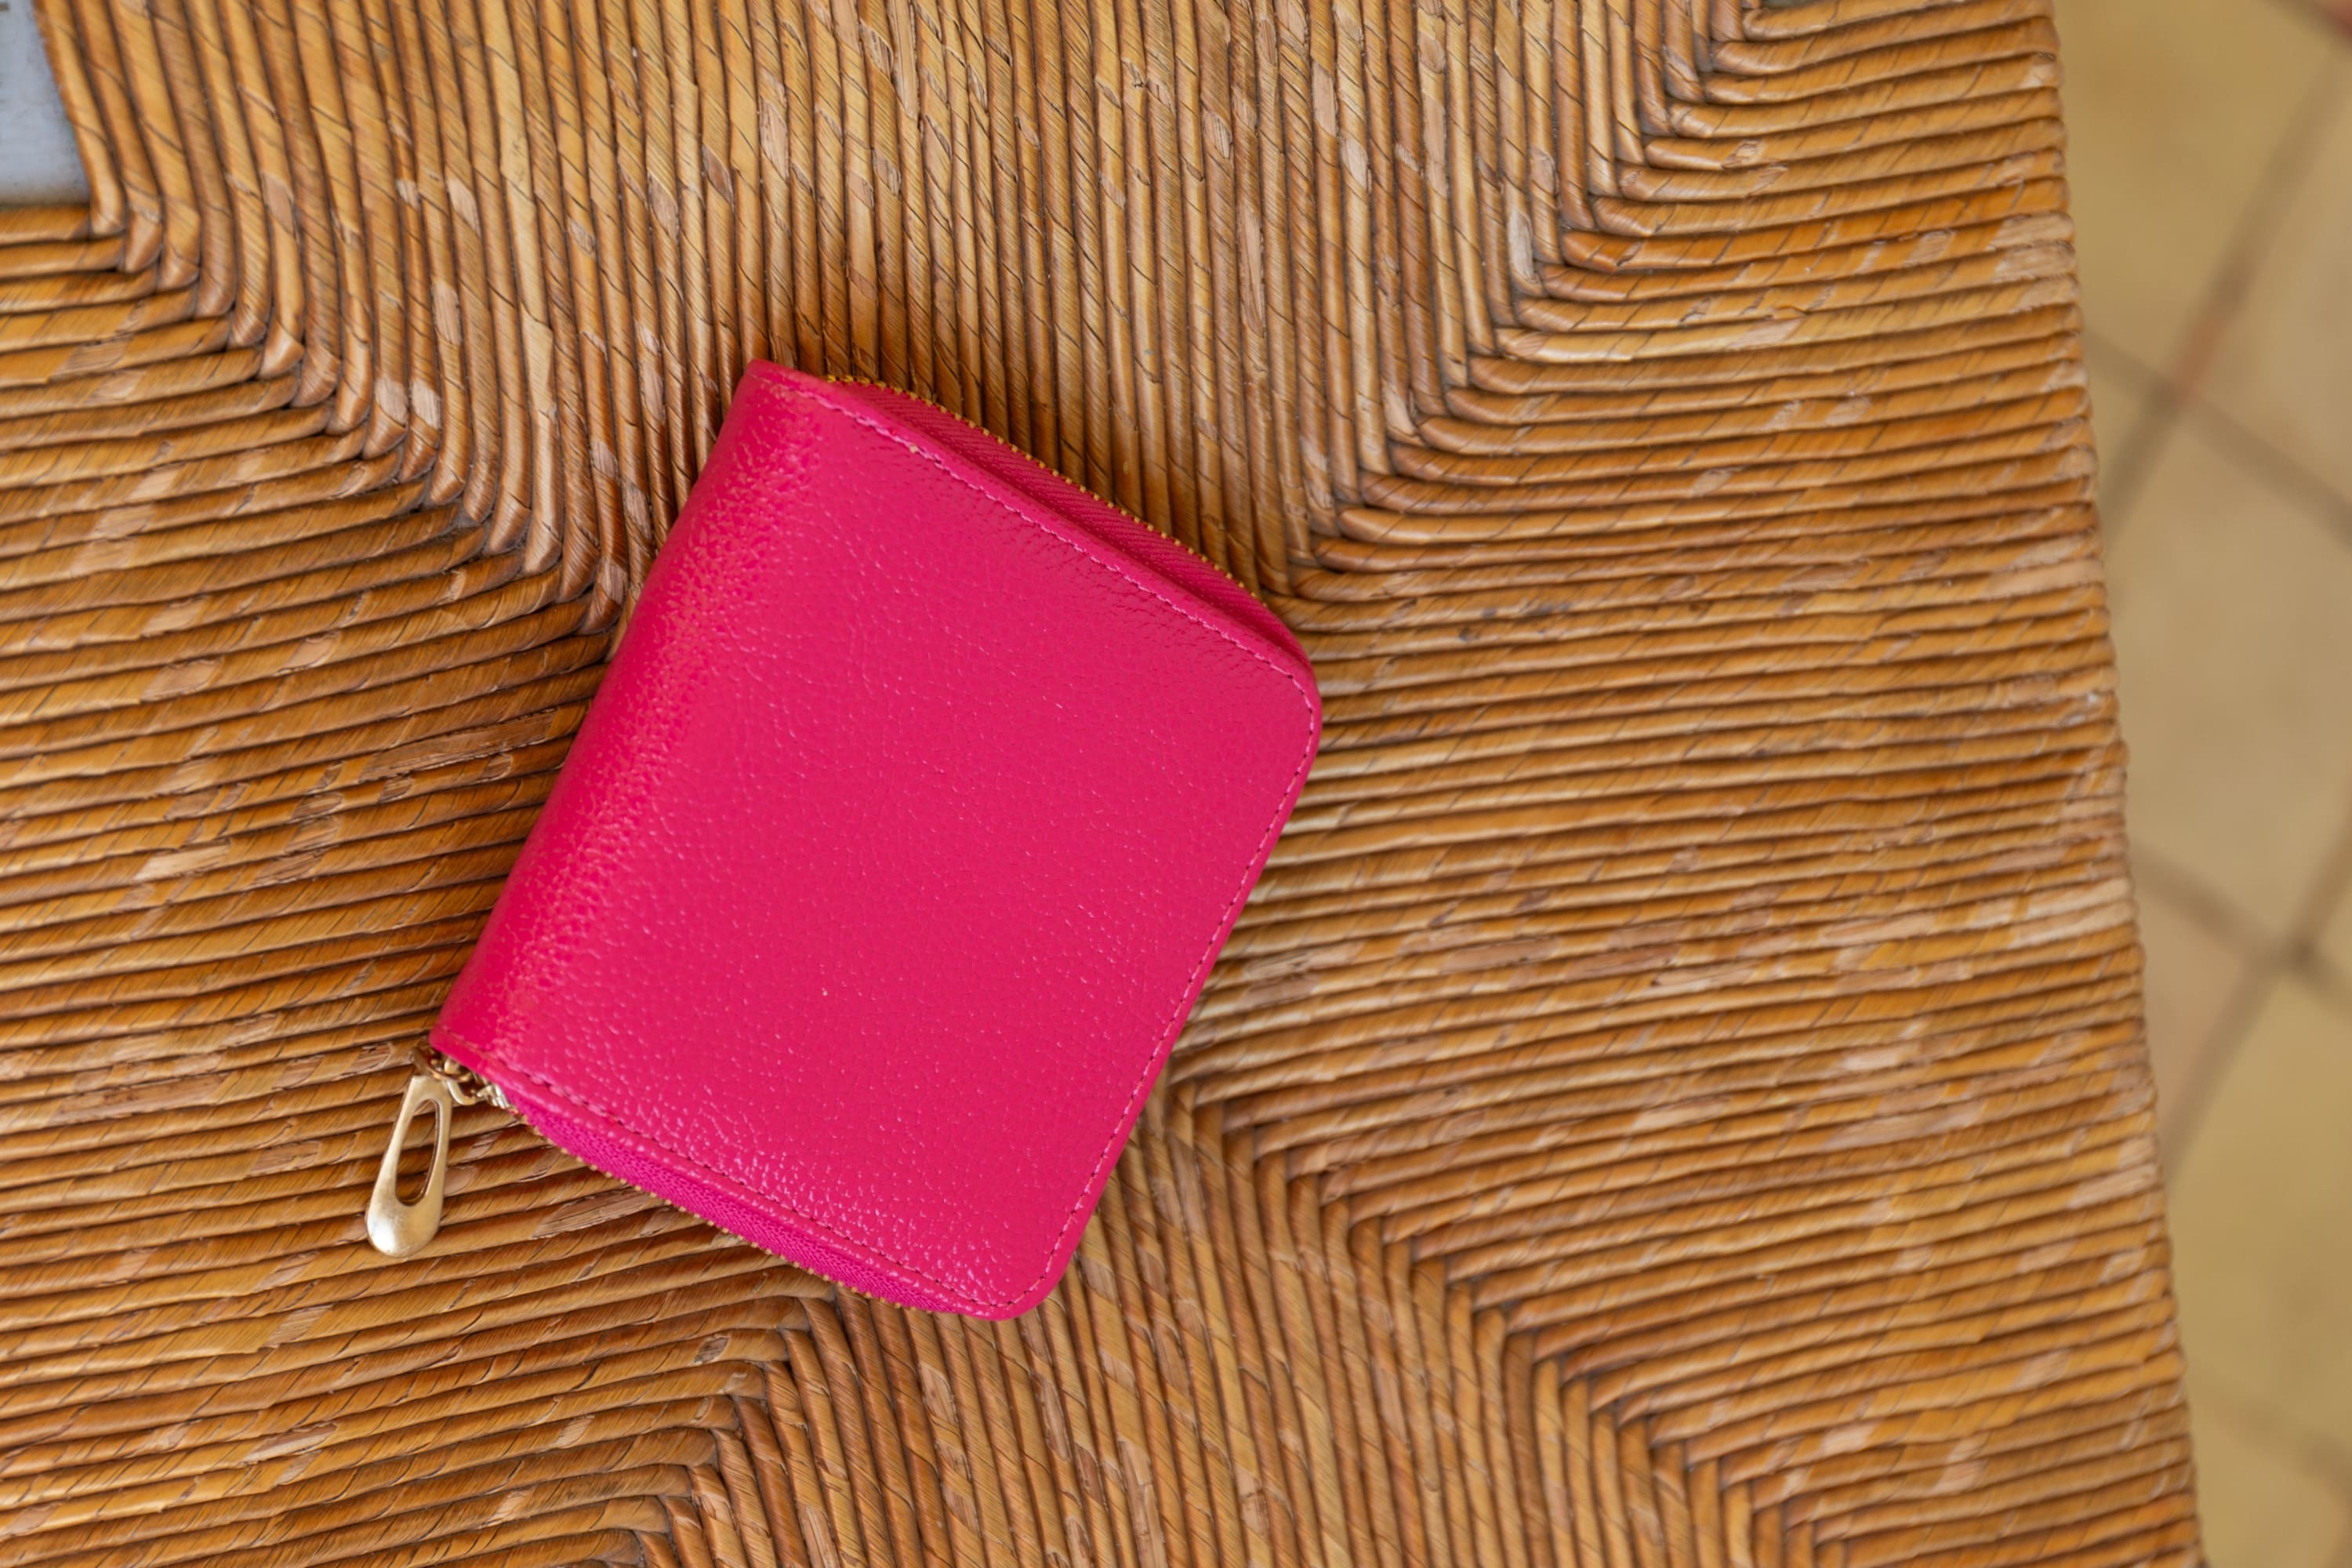 Ordener wallet - Small leather goods